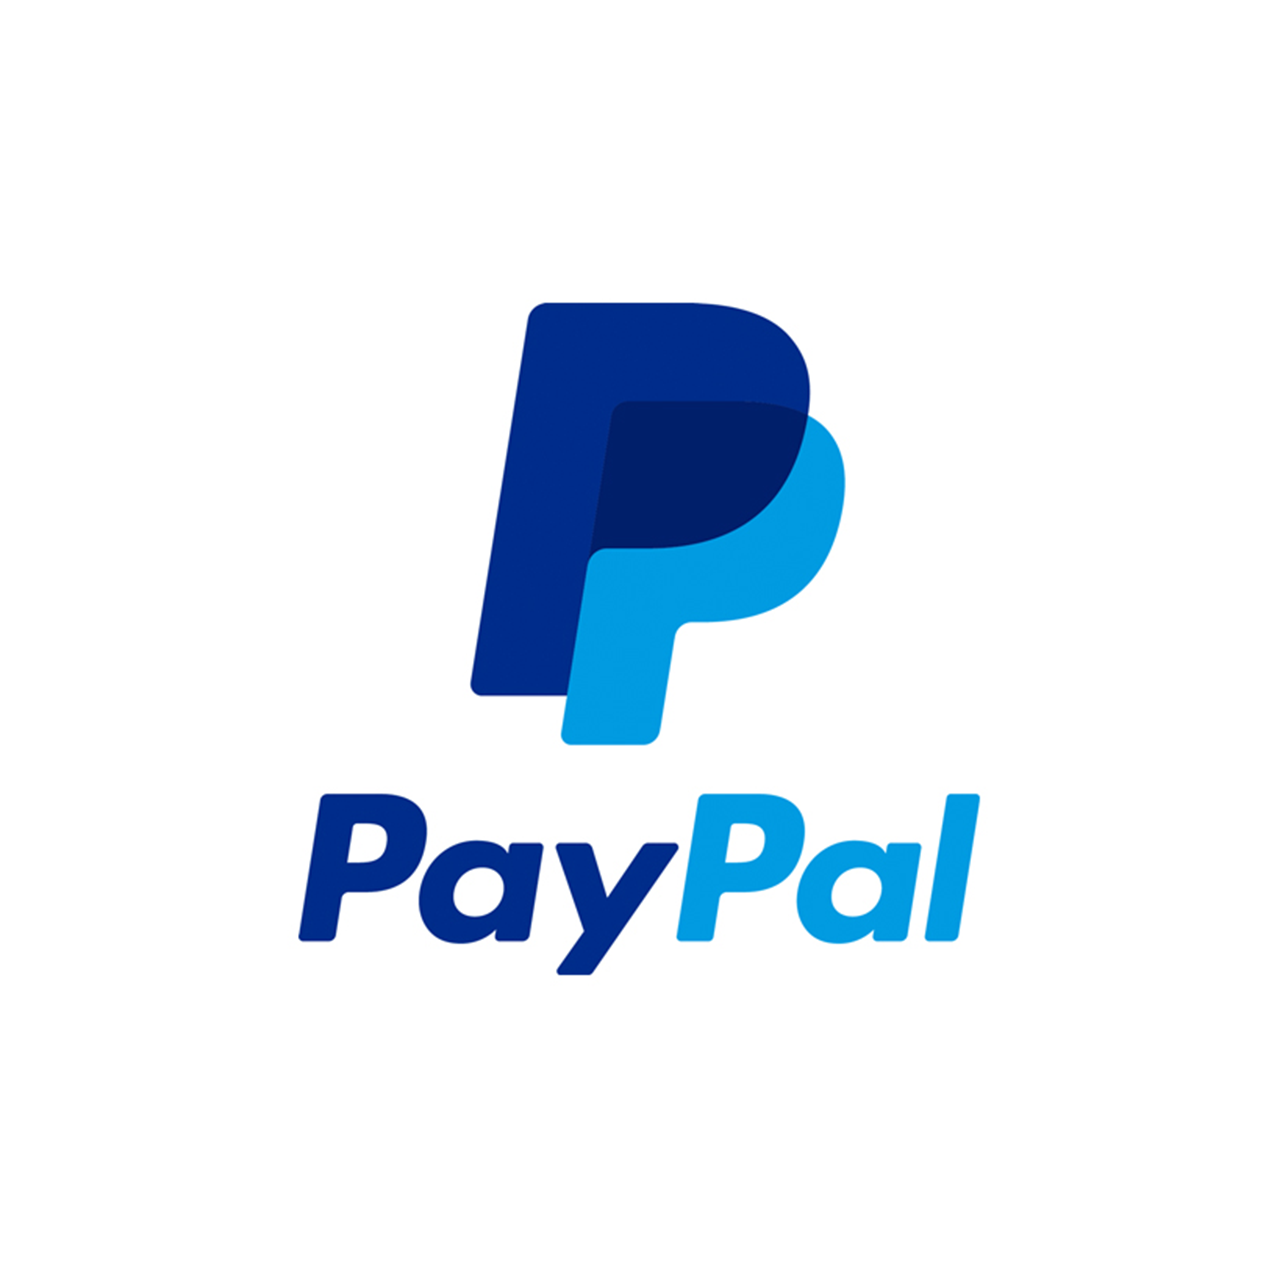 pay with paypal logo